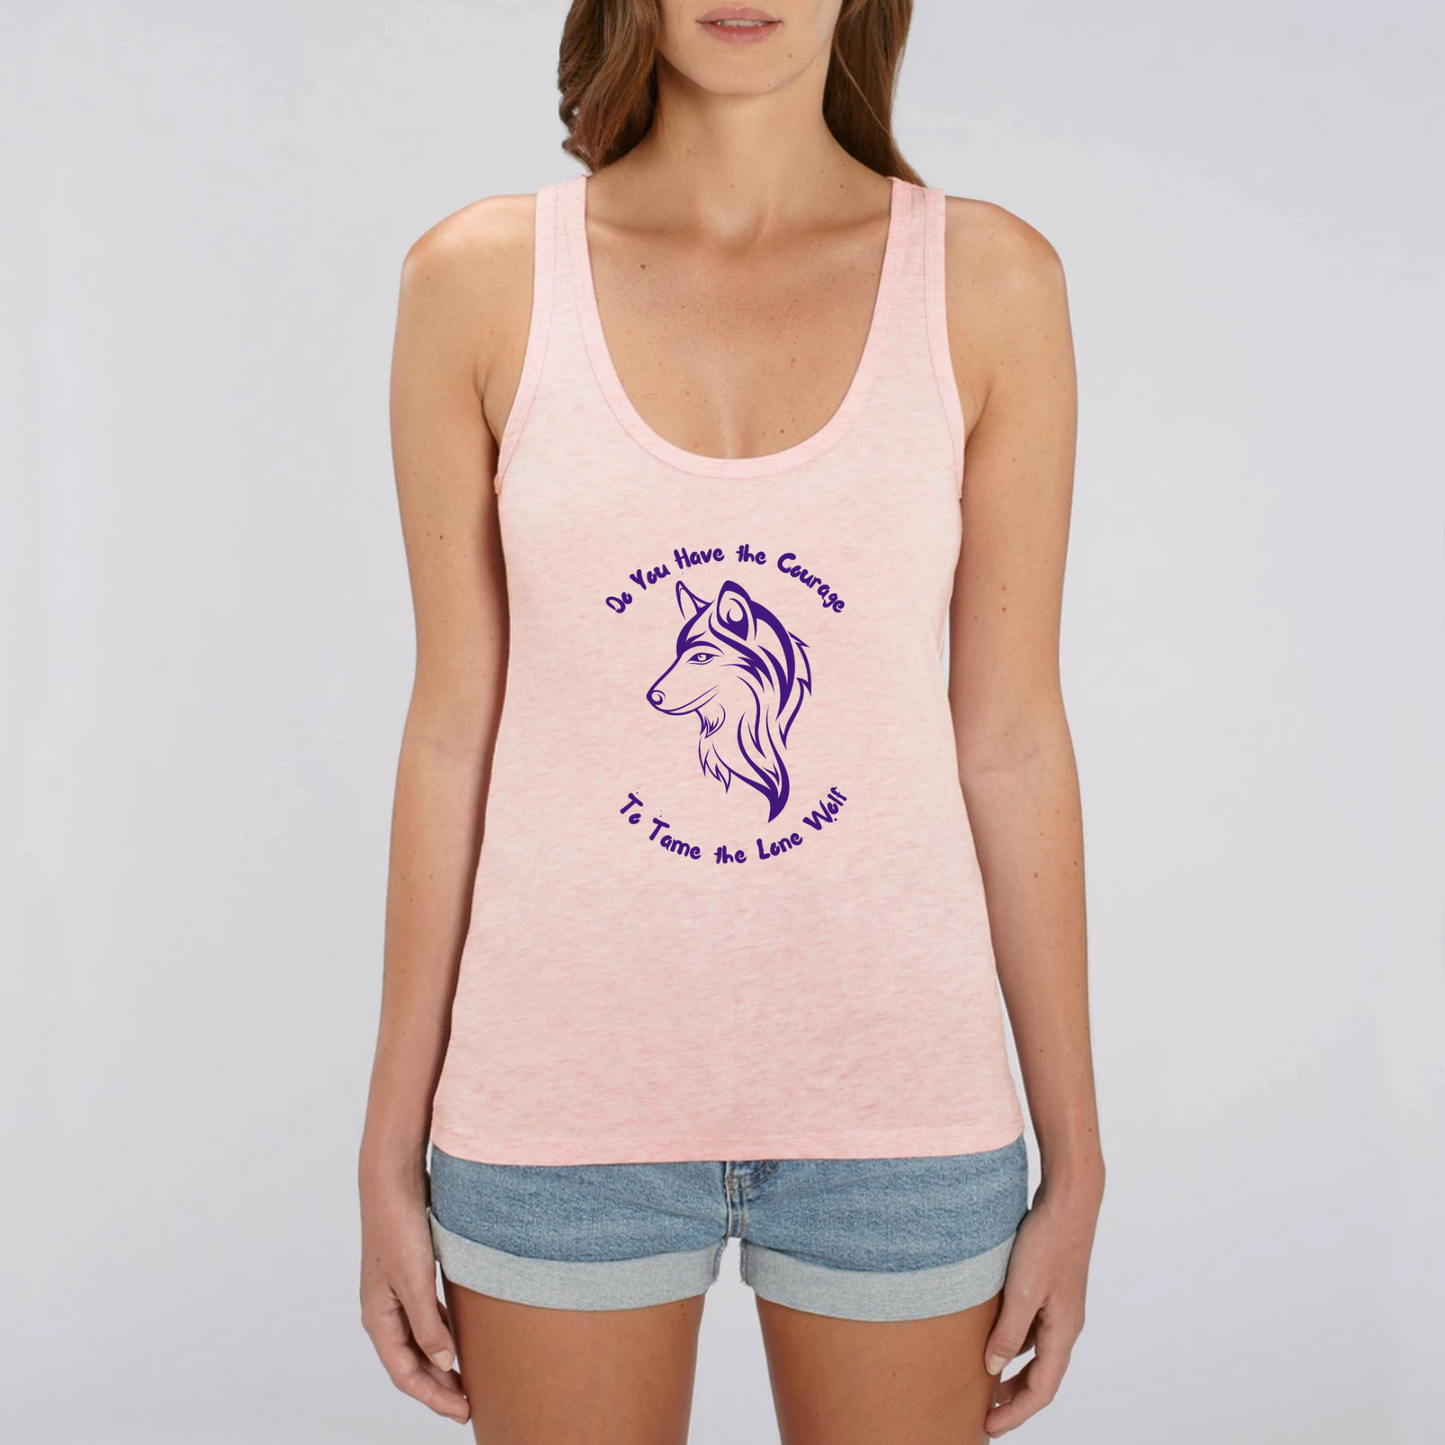 Model wearing a tank top with graphic design of a lone female wolf with wording Do you have the courage to tame the lone wolf. The tank top is pink